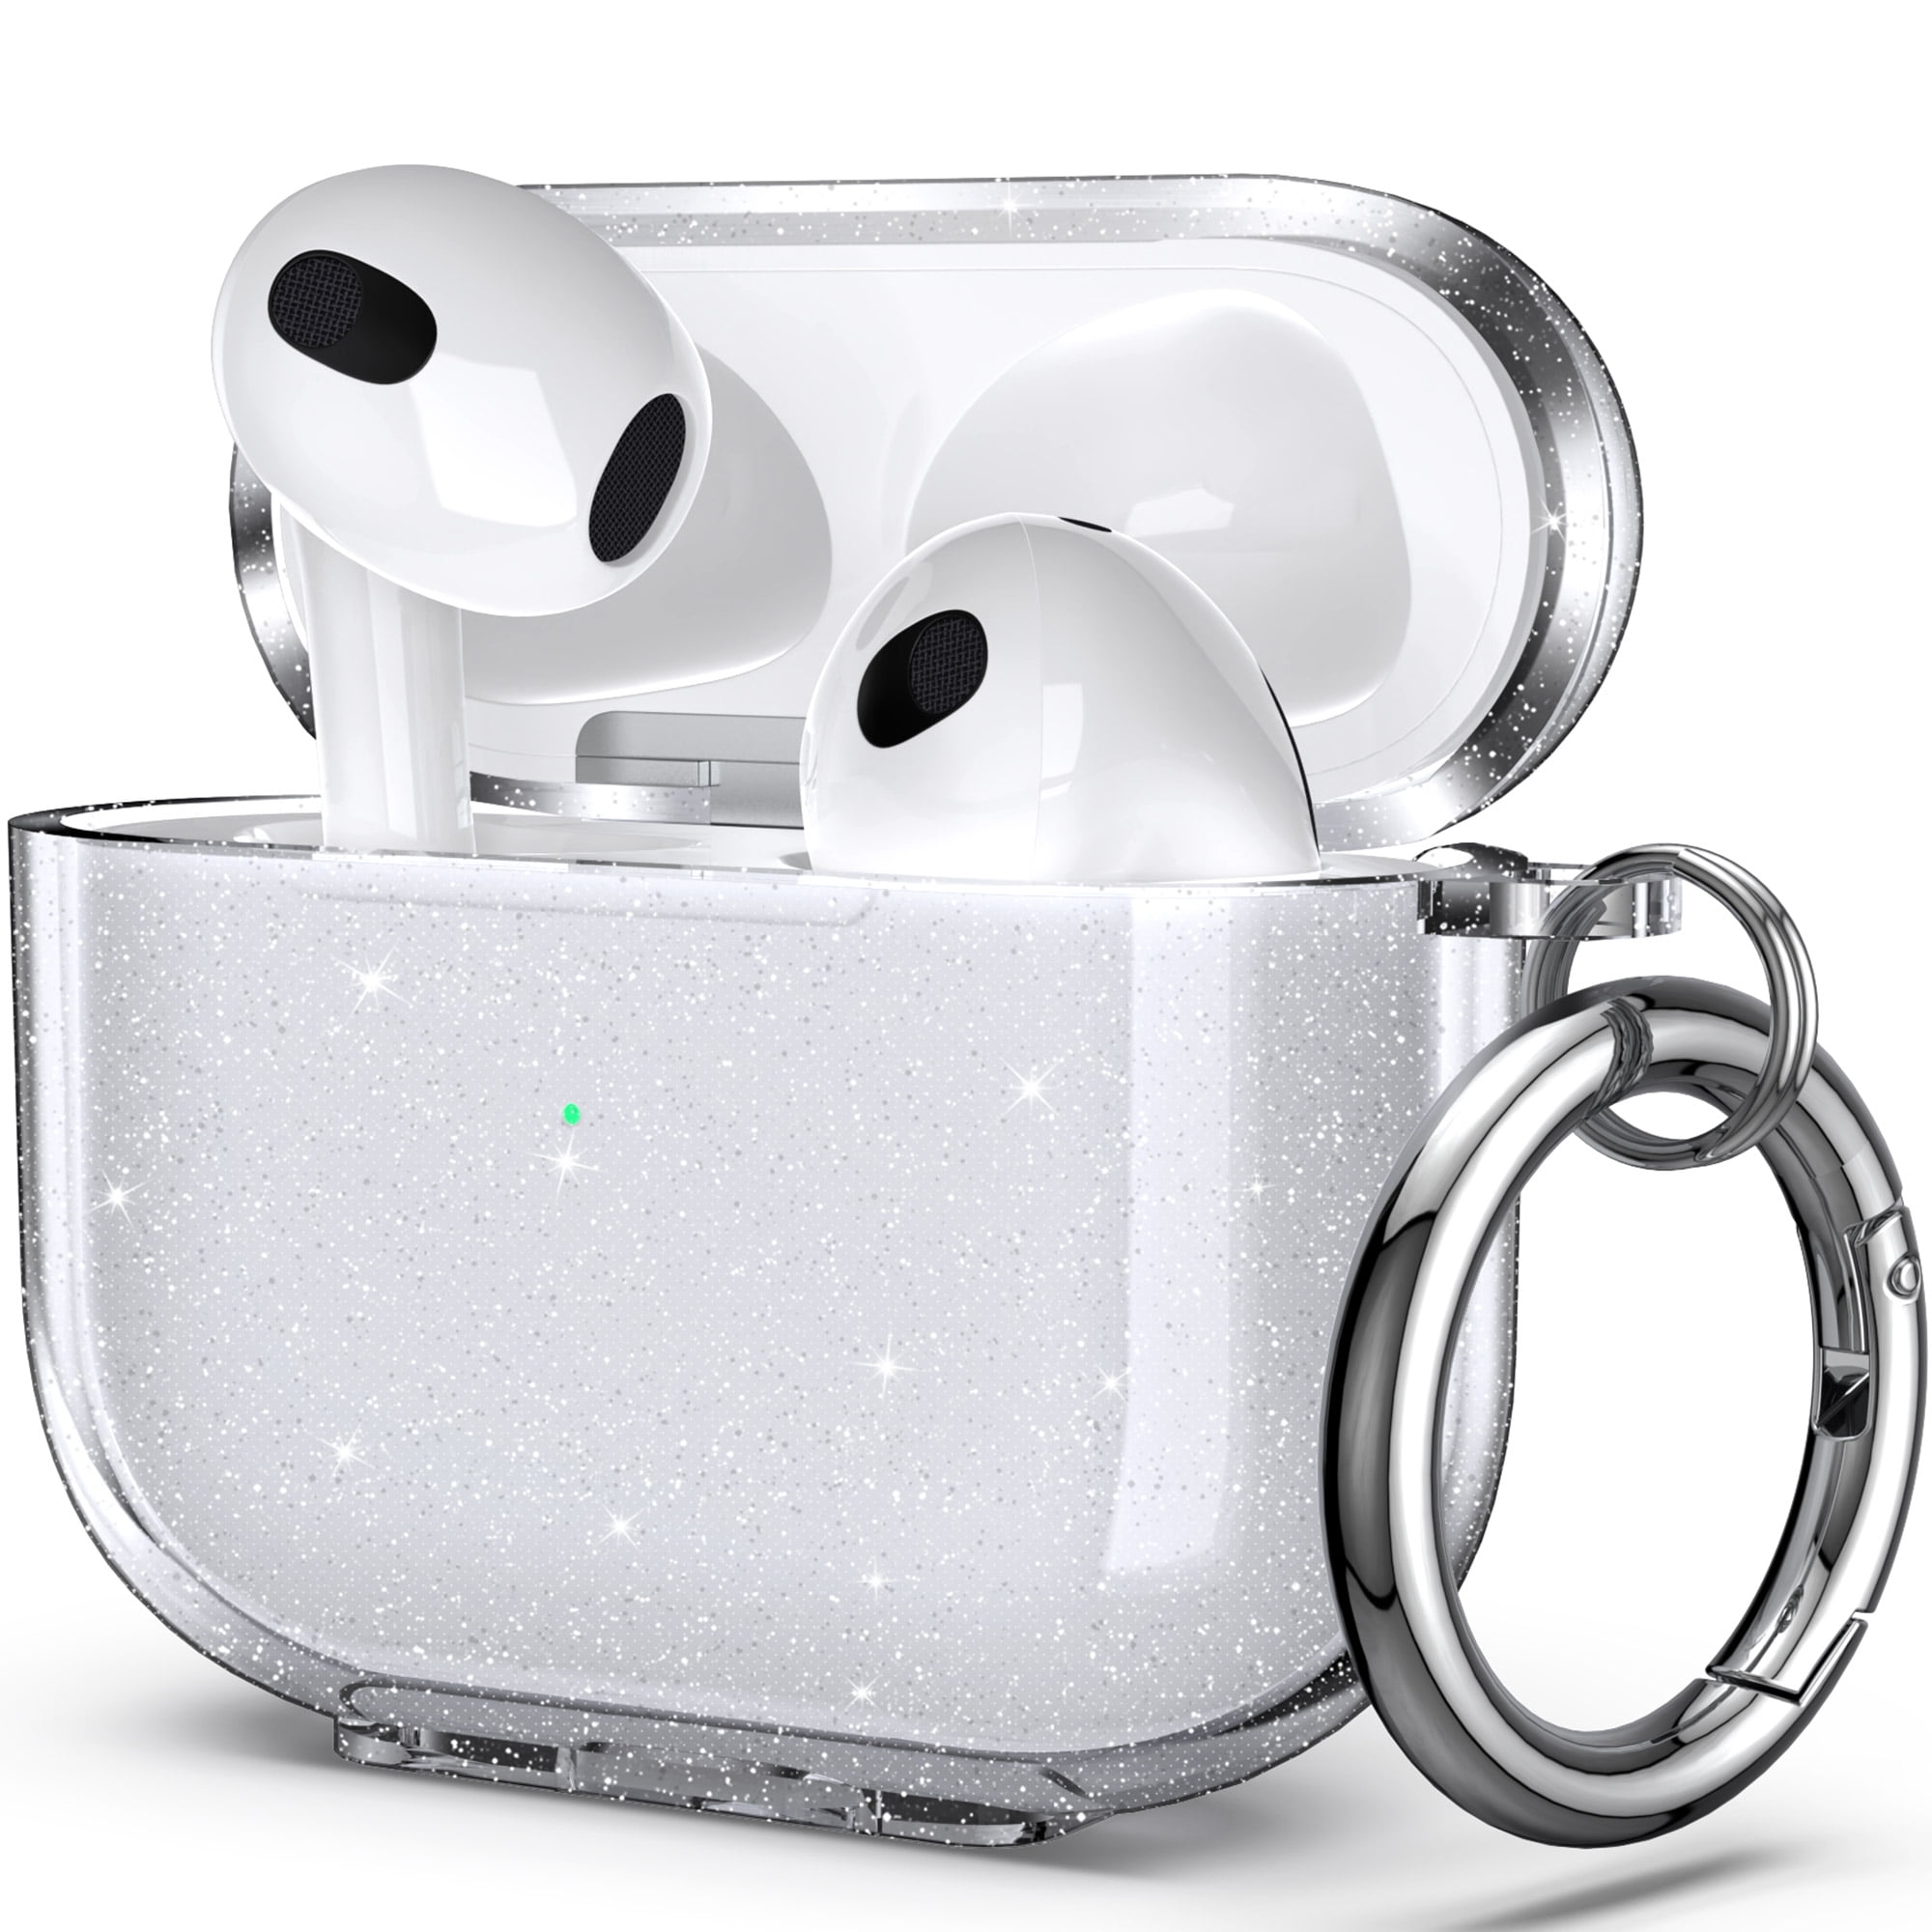 ULAK Airpods 3 Case Cover, Clear Bumper Carrying Case for Apple AirPods 3rd Generation 2021 with Key Crystal - Walmart.com